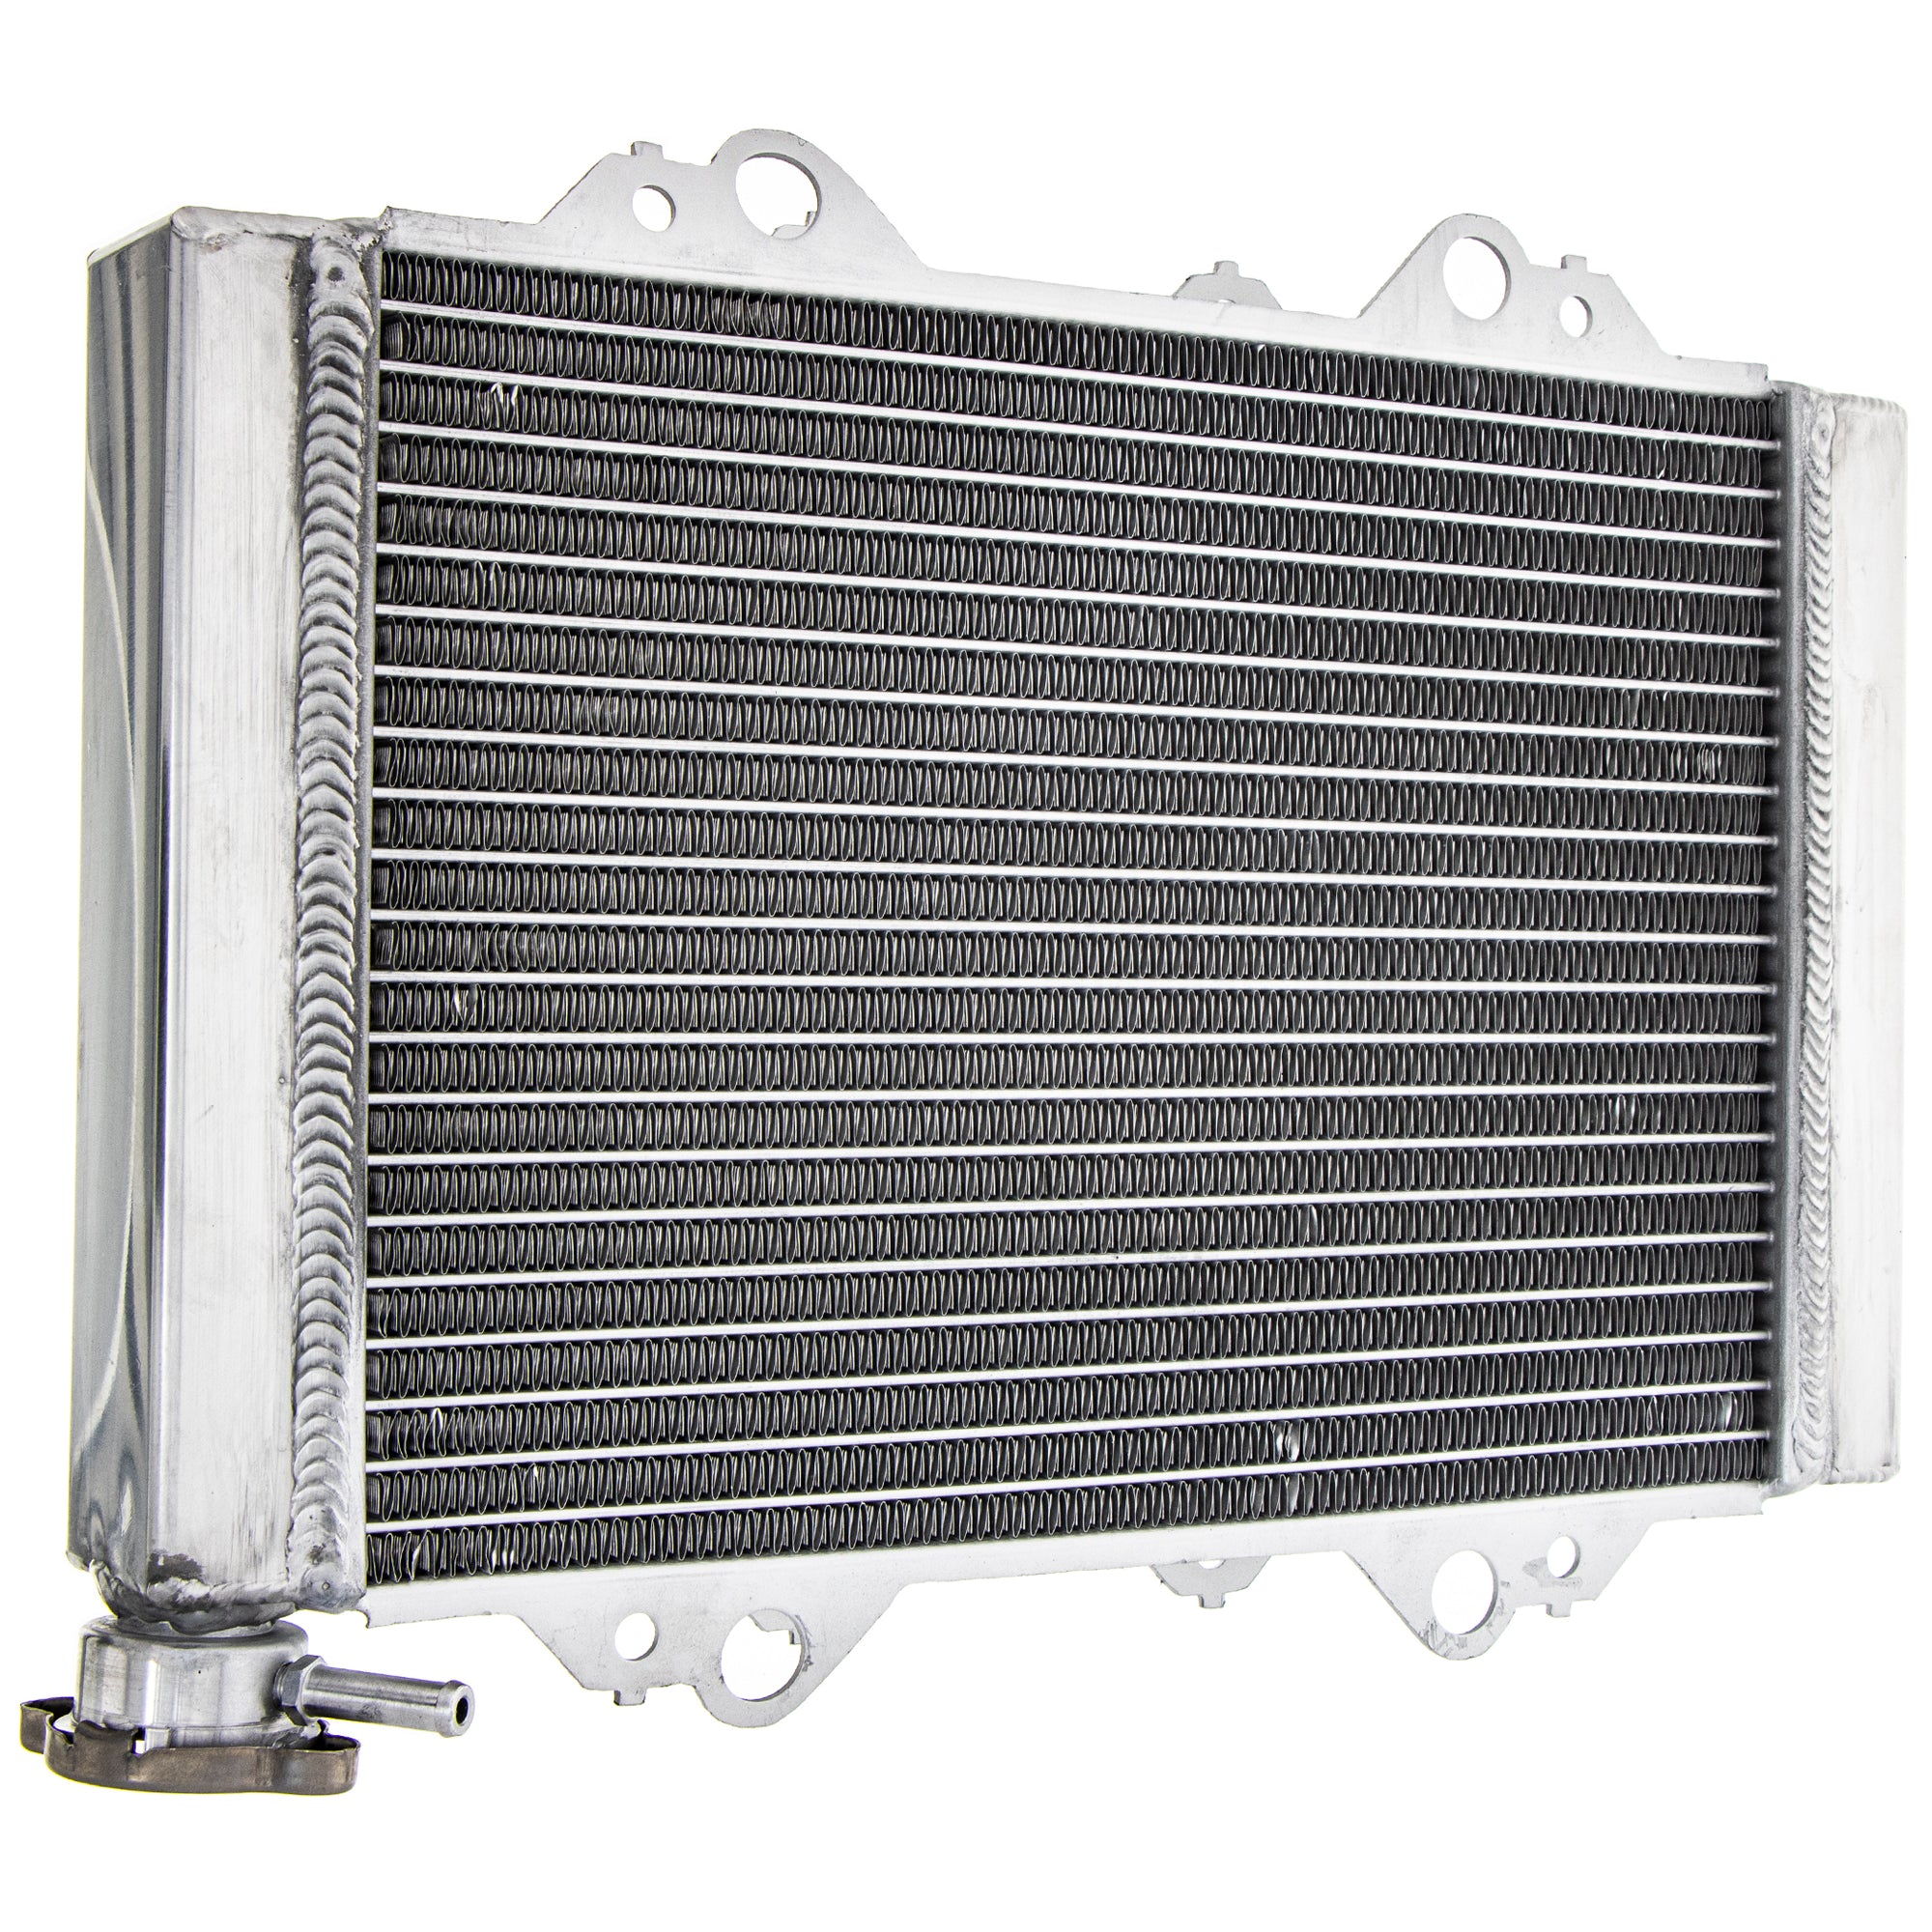 NICHE 519-CRD2250A High Capacity Radiator for zOTHER KFX450R